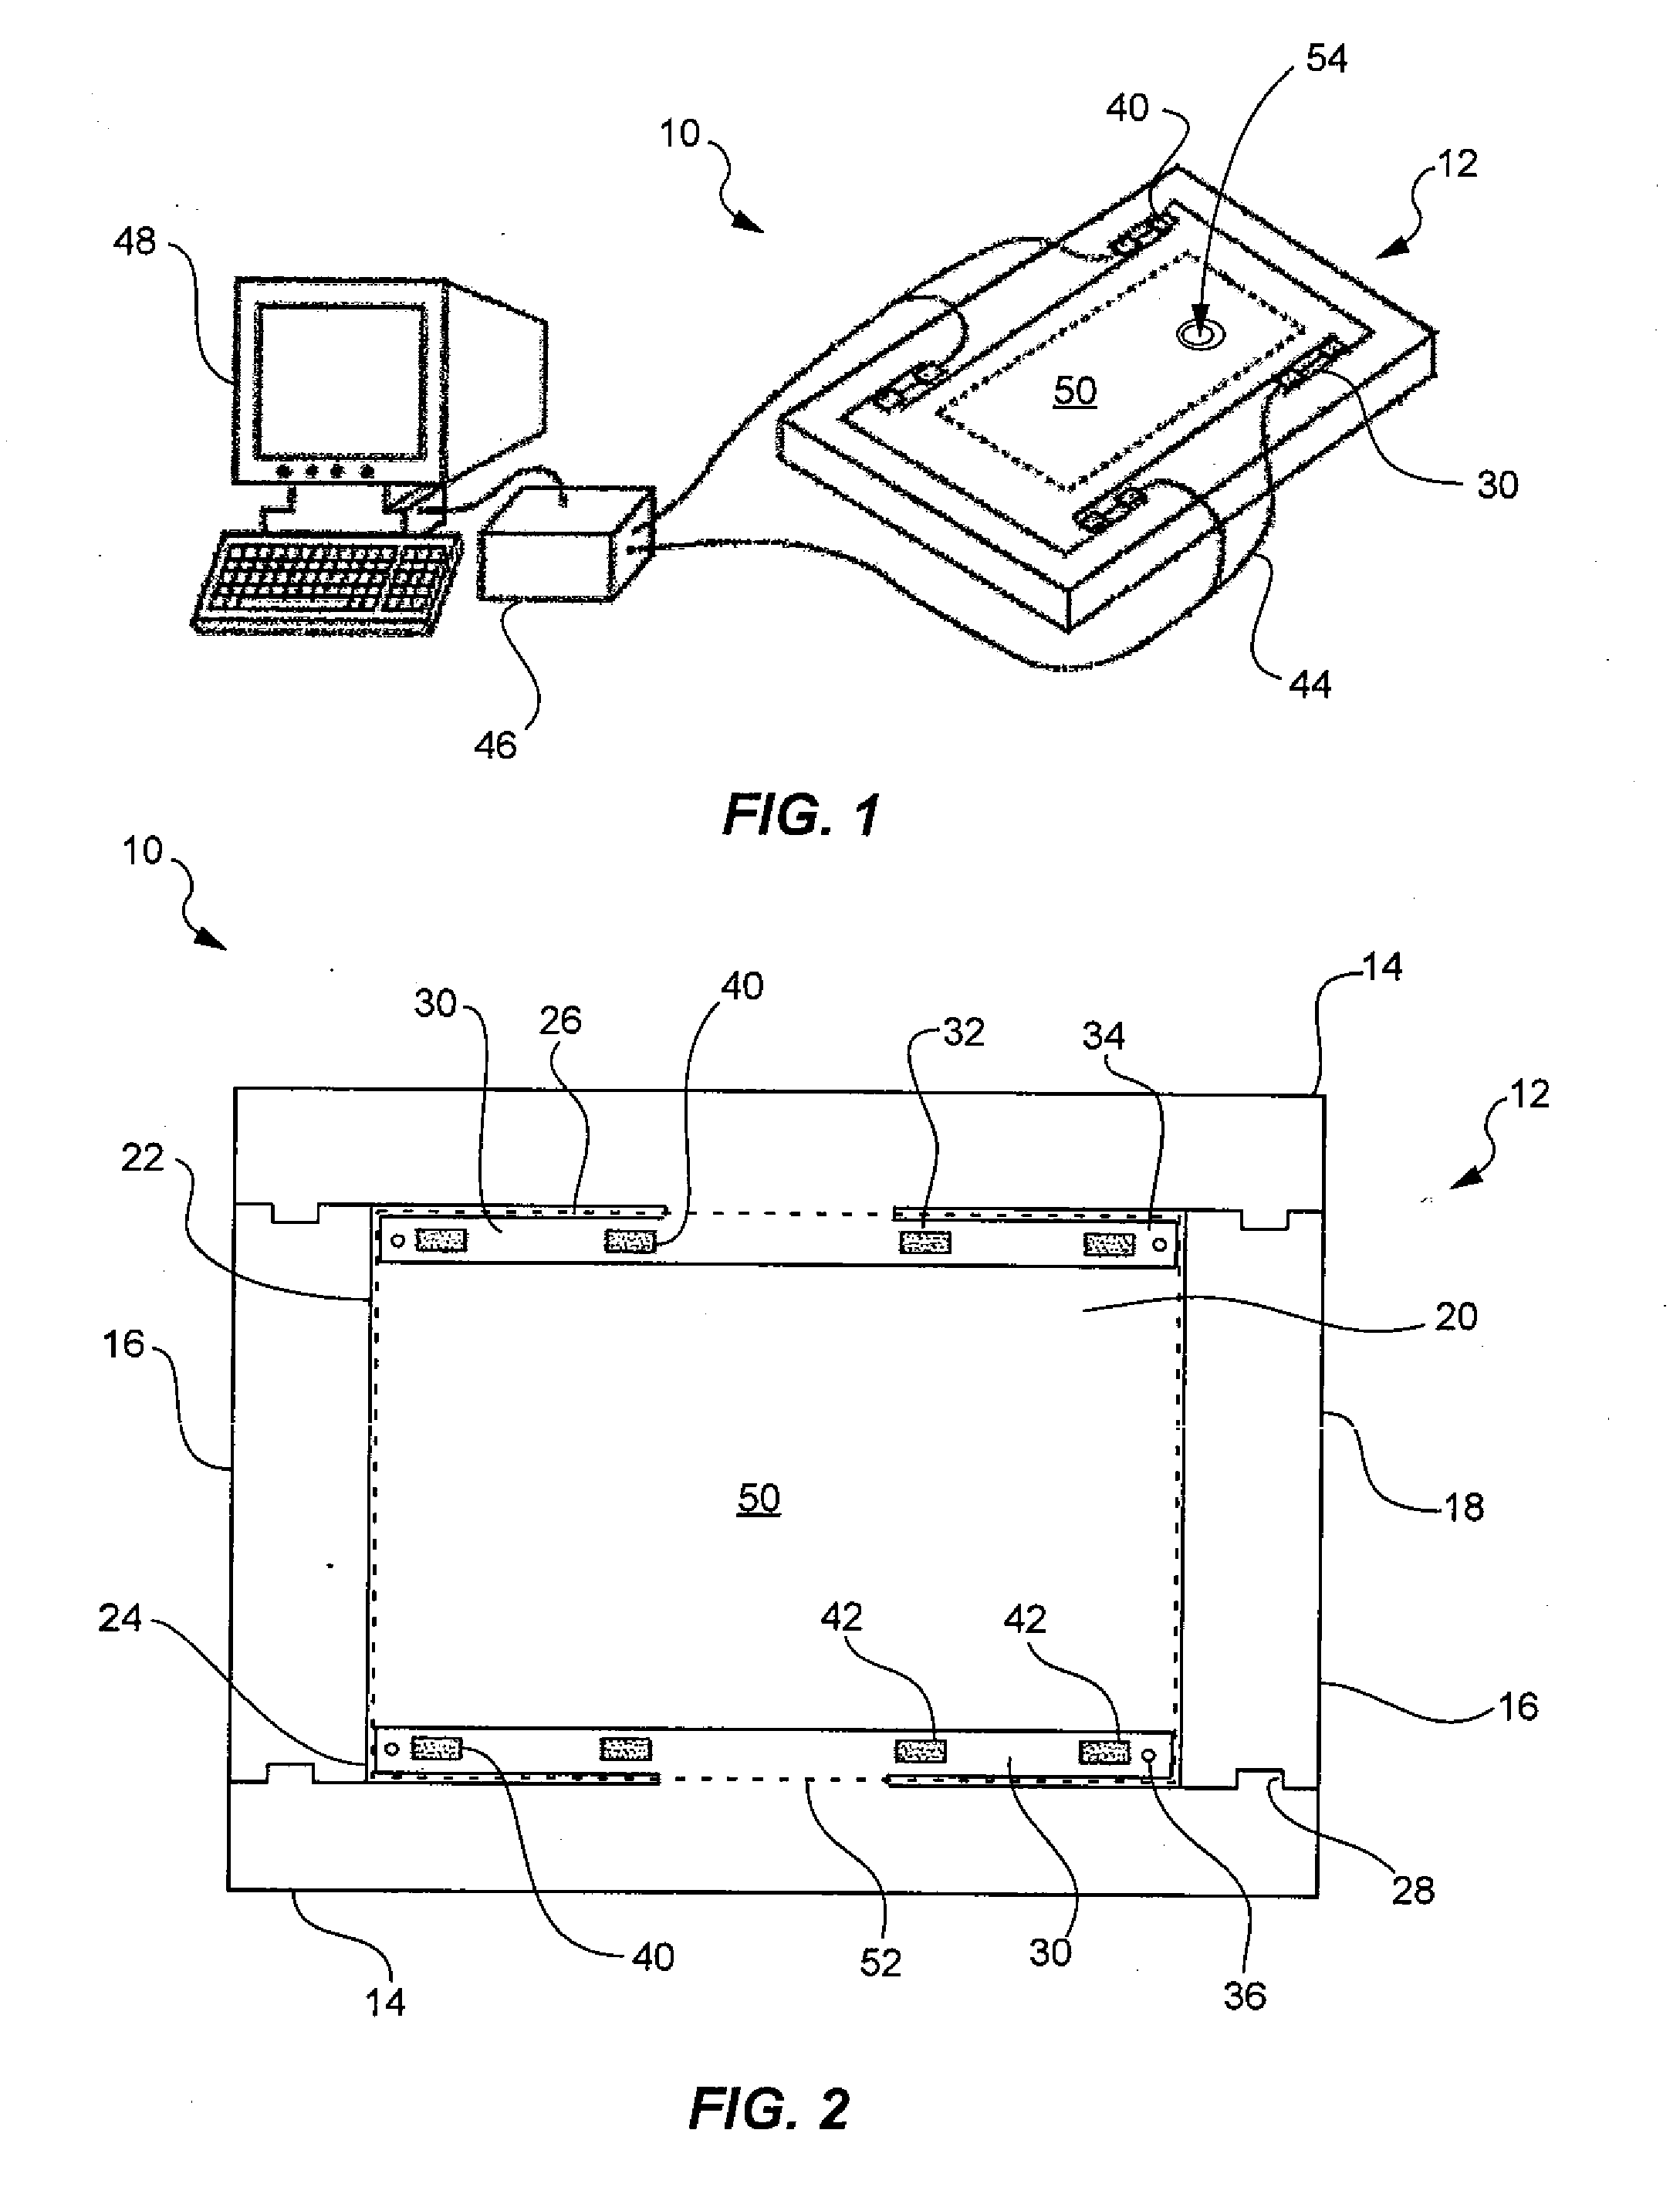 Stress-Limiting Device For Forced-Based Input Panels